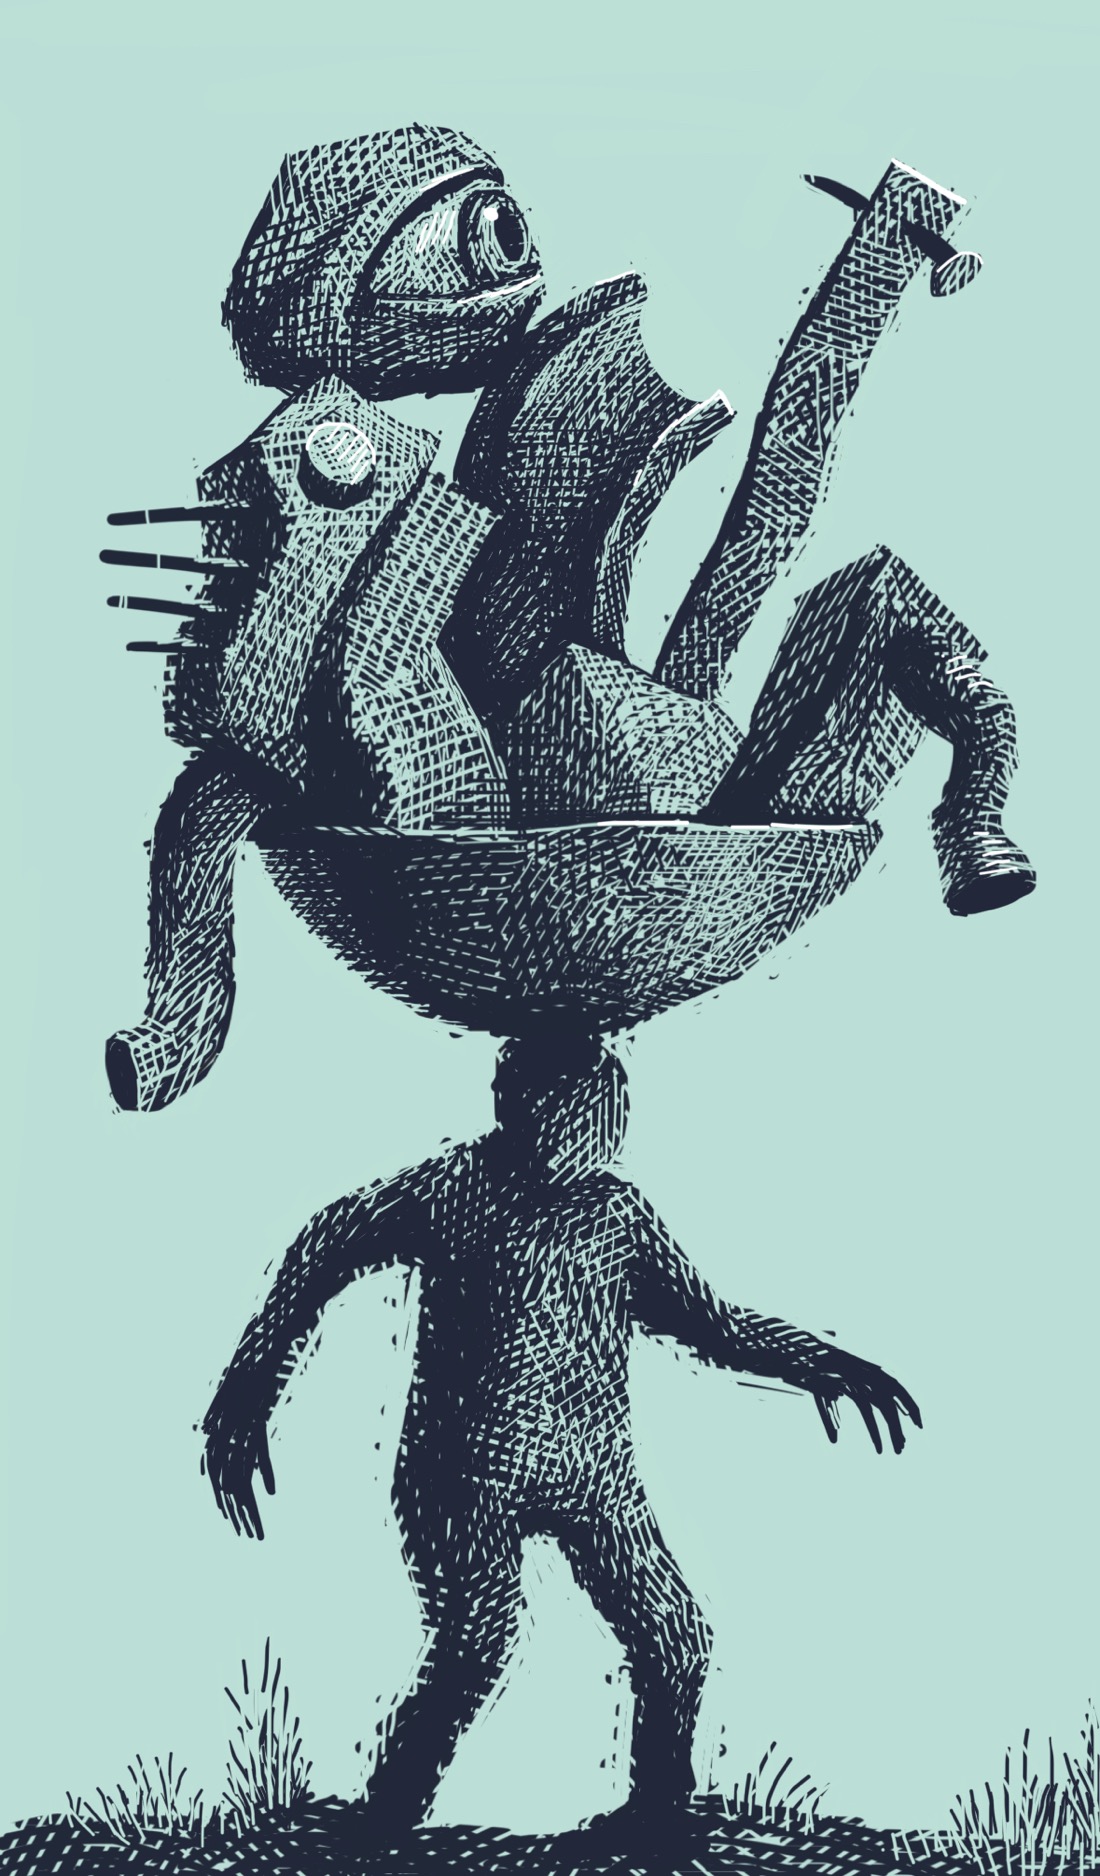 A faceless figure staggers along, a large salad bowl (or maybe a wok) balanced on its head. Inside the bowl is a collection of large, heavy, unrecognizable bits and pieces. Most look like industrial detritus; one looks like a boulder with an eye.